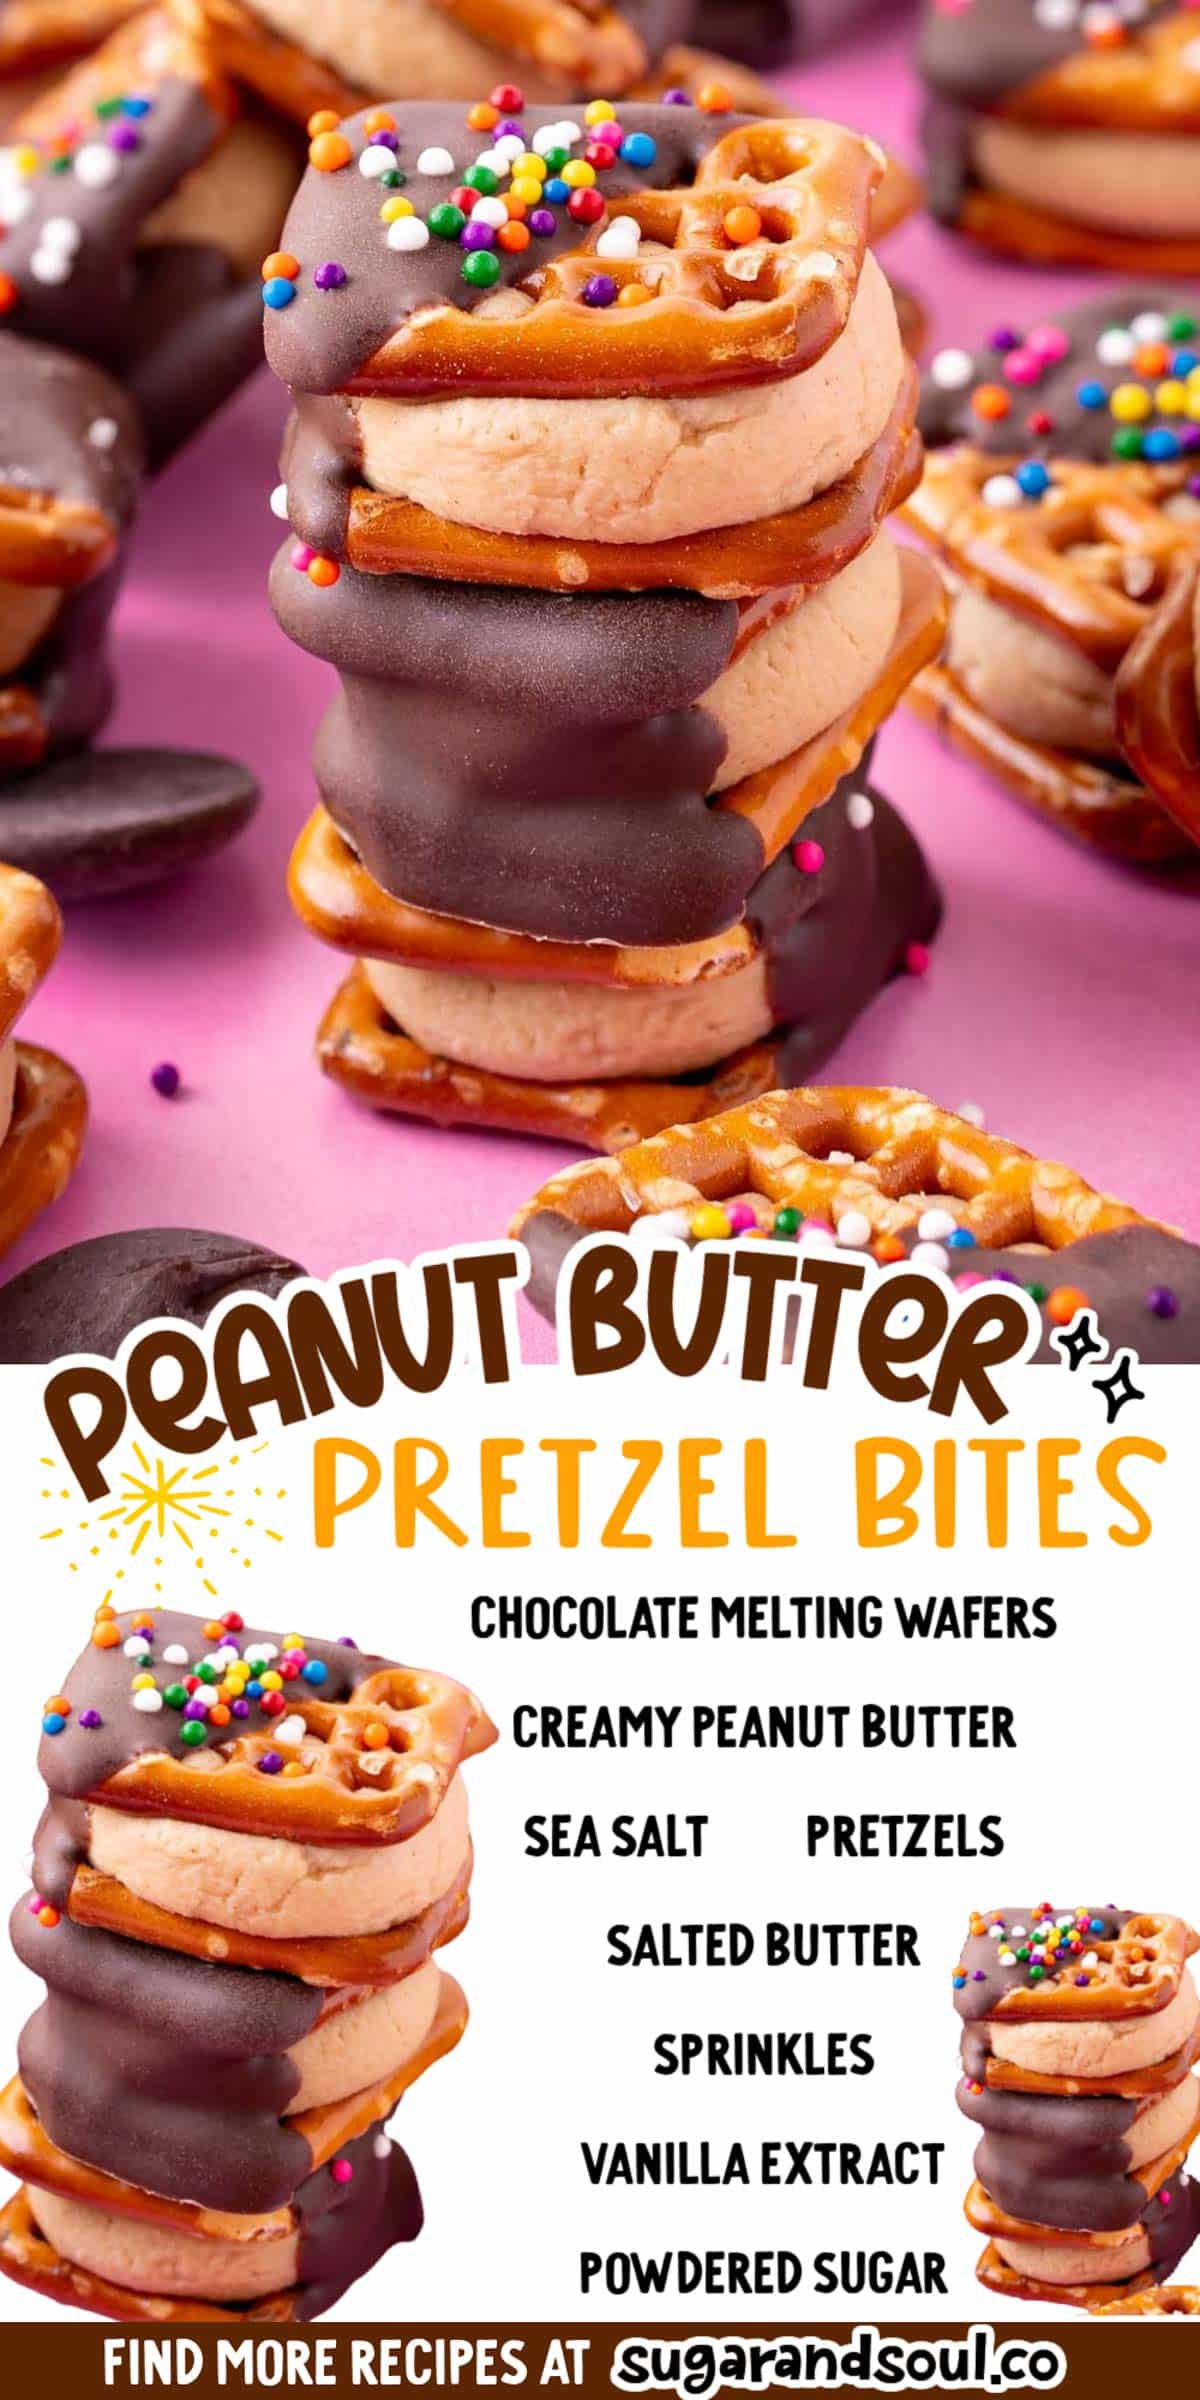 Peanut Butter Pretzel Bites are a simple no-bake recipe with easy ingredients that combine for everyone's favorite salty, sweet snack combination! A great treat to share at parties and holiday gatherings!  via @sugarandsoulco